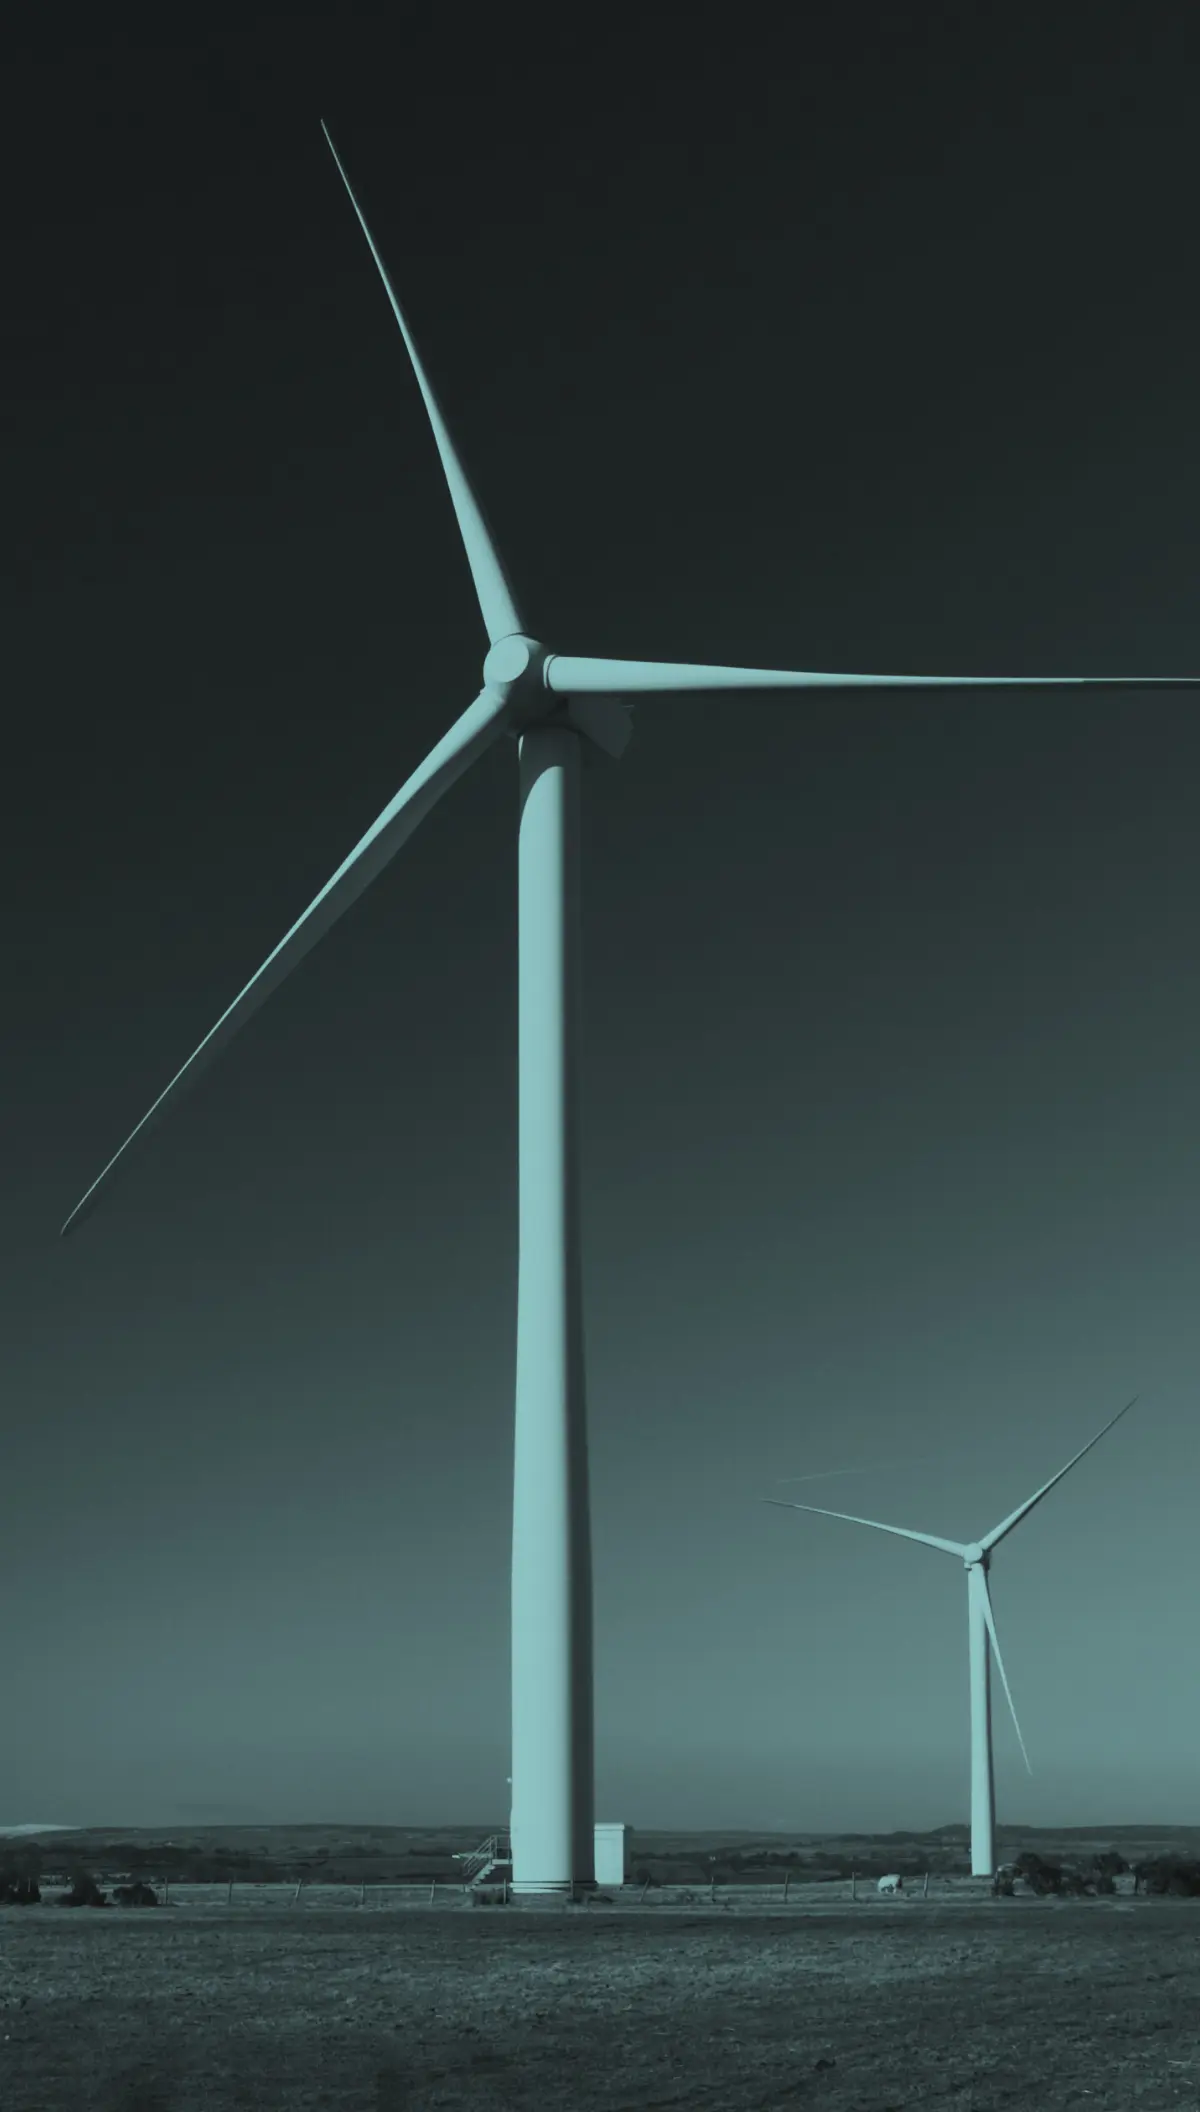 green energy procurement from a range of sustainable sources, such as wind, solar and hydro